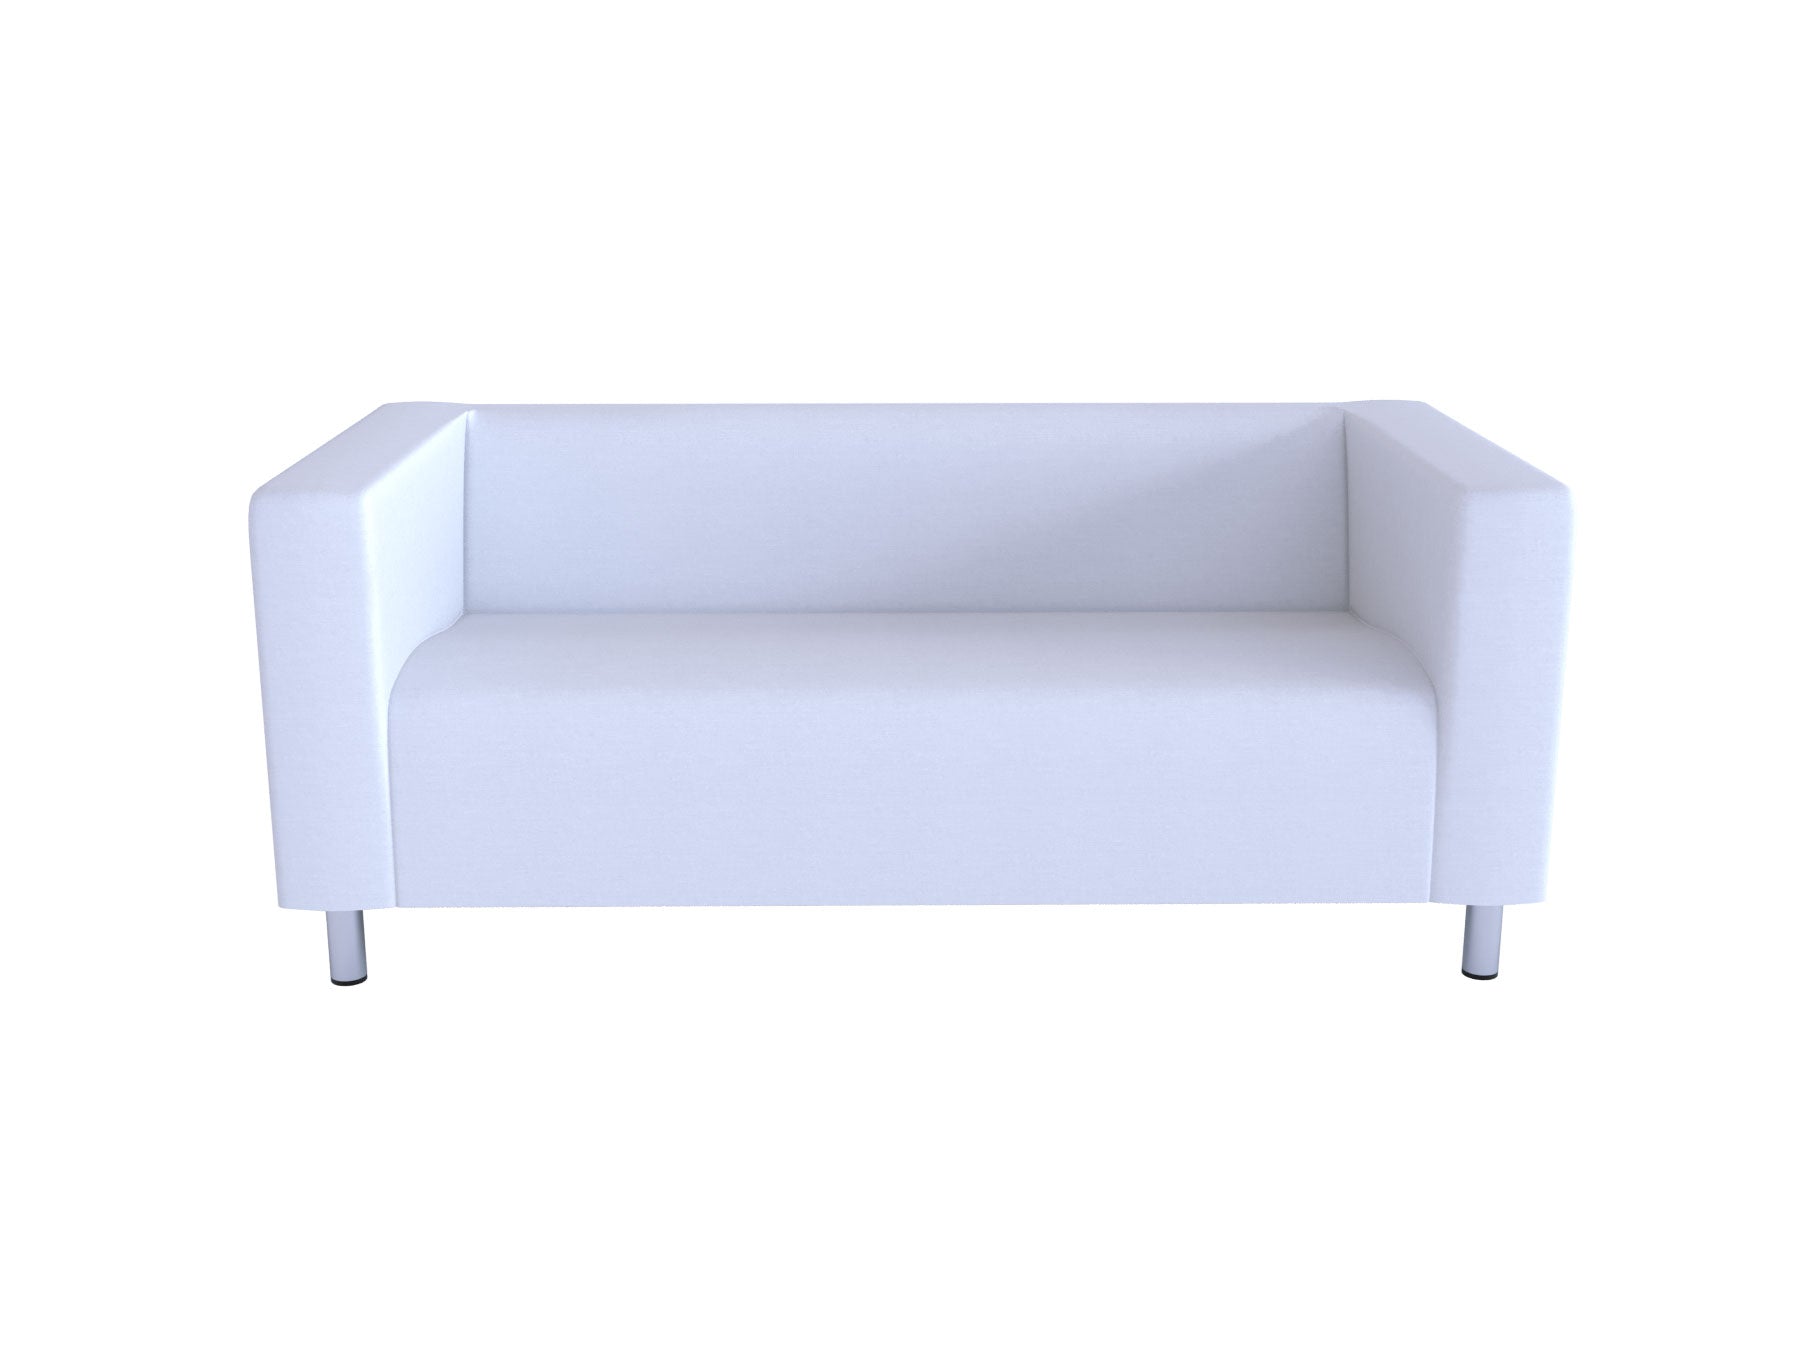 Home Furniture IKEA IKEA Klippan COUCH with a WASHABLE COTTON COVER 2  Seater Sofa Settee Not Leather fysoline.vn